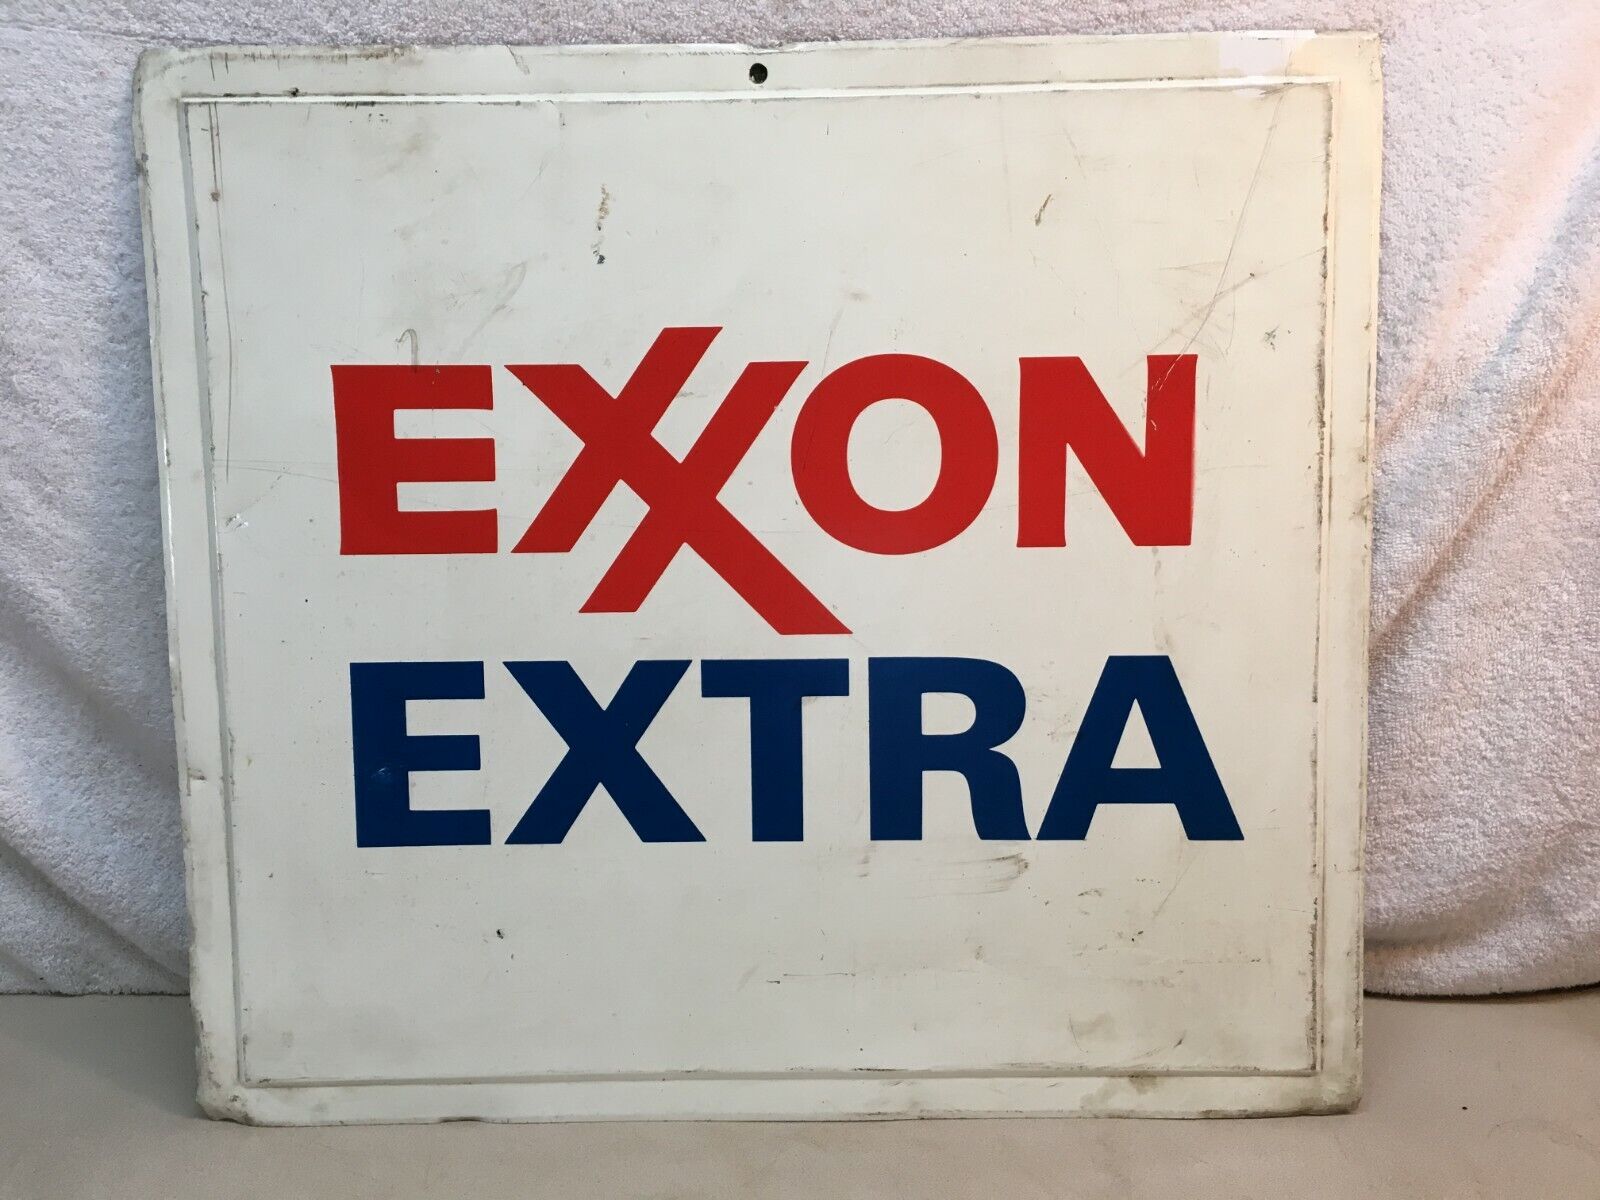 Vintage EXXON EXTRA Metal  Gas Station Sign 22.5in x 20in Authentic 